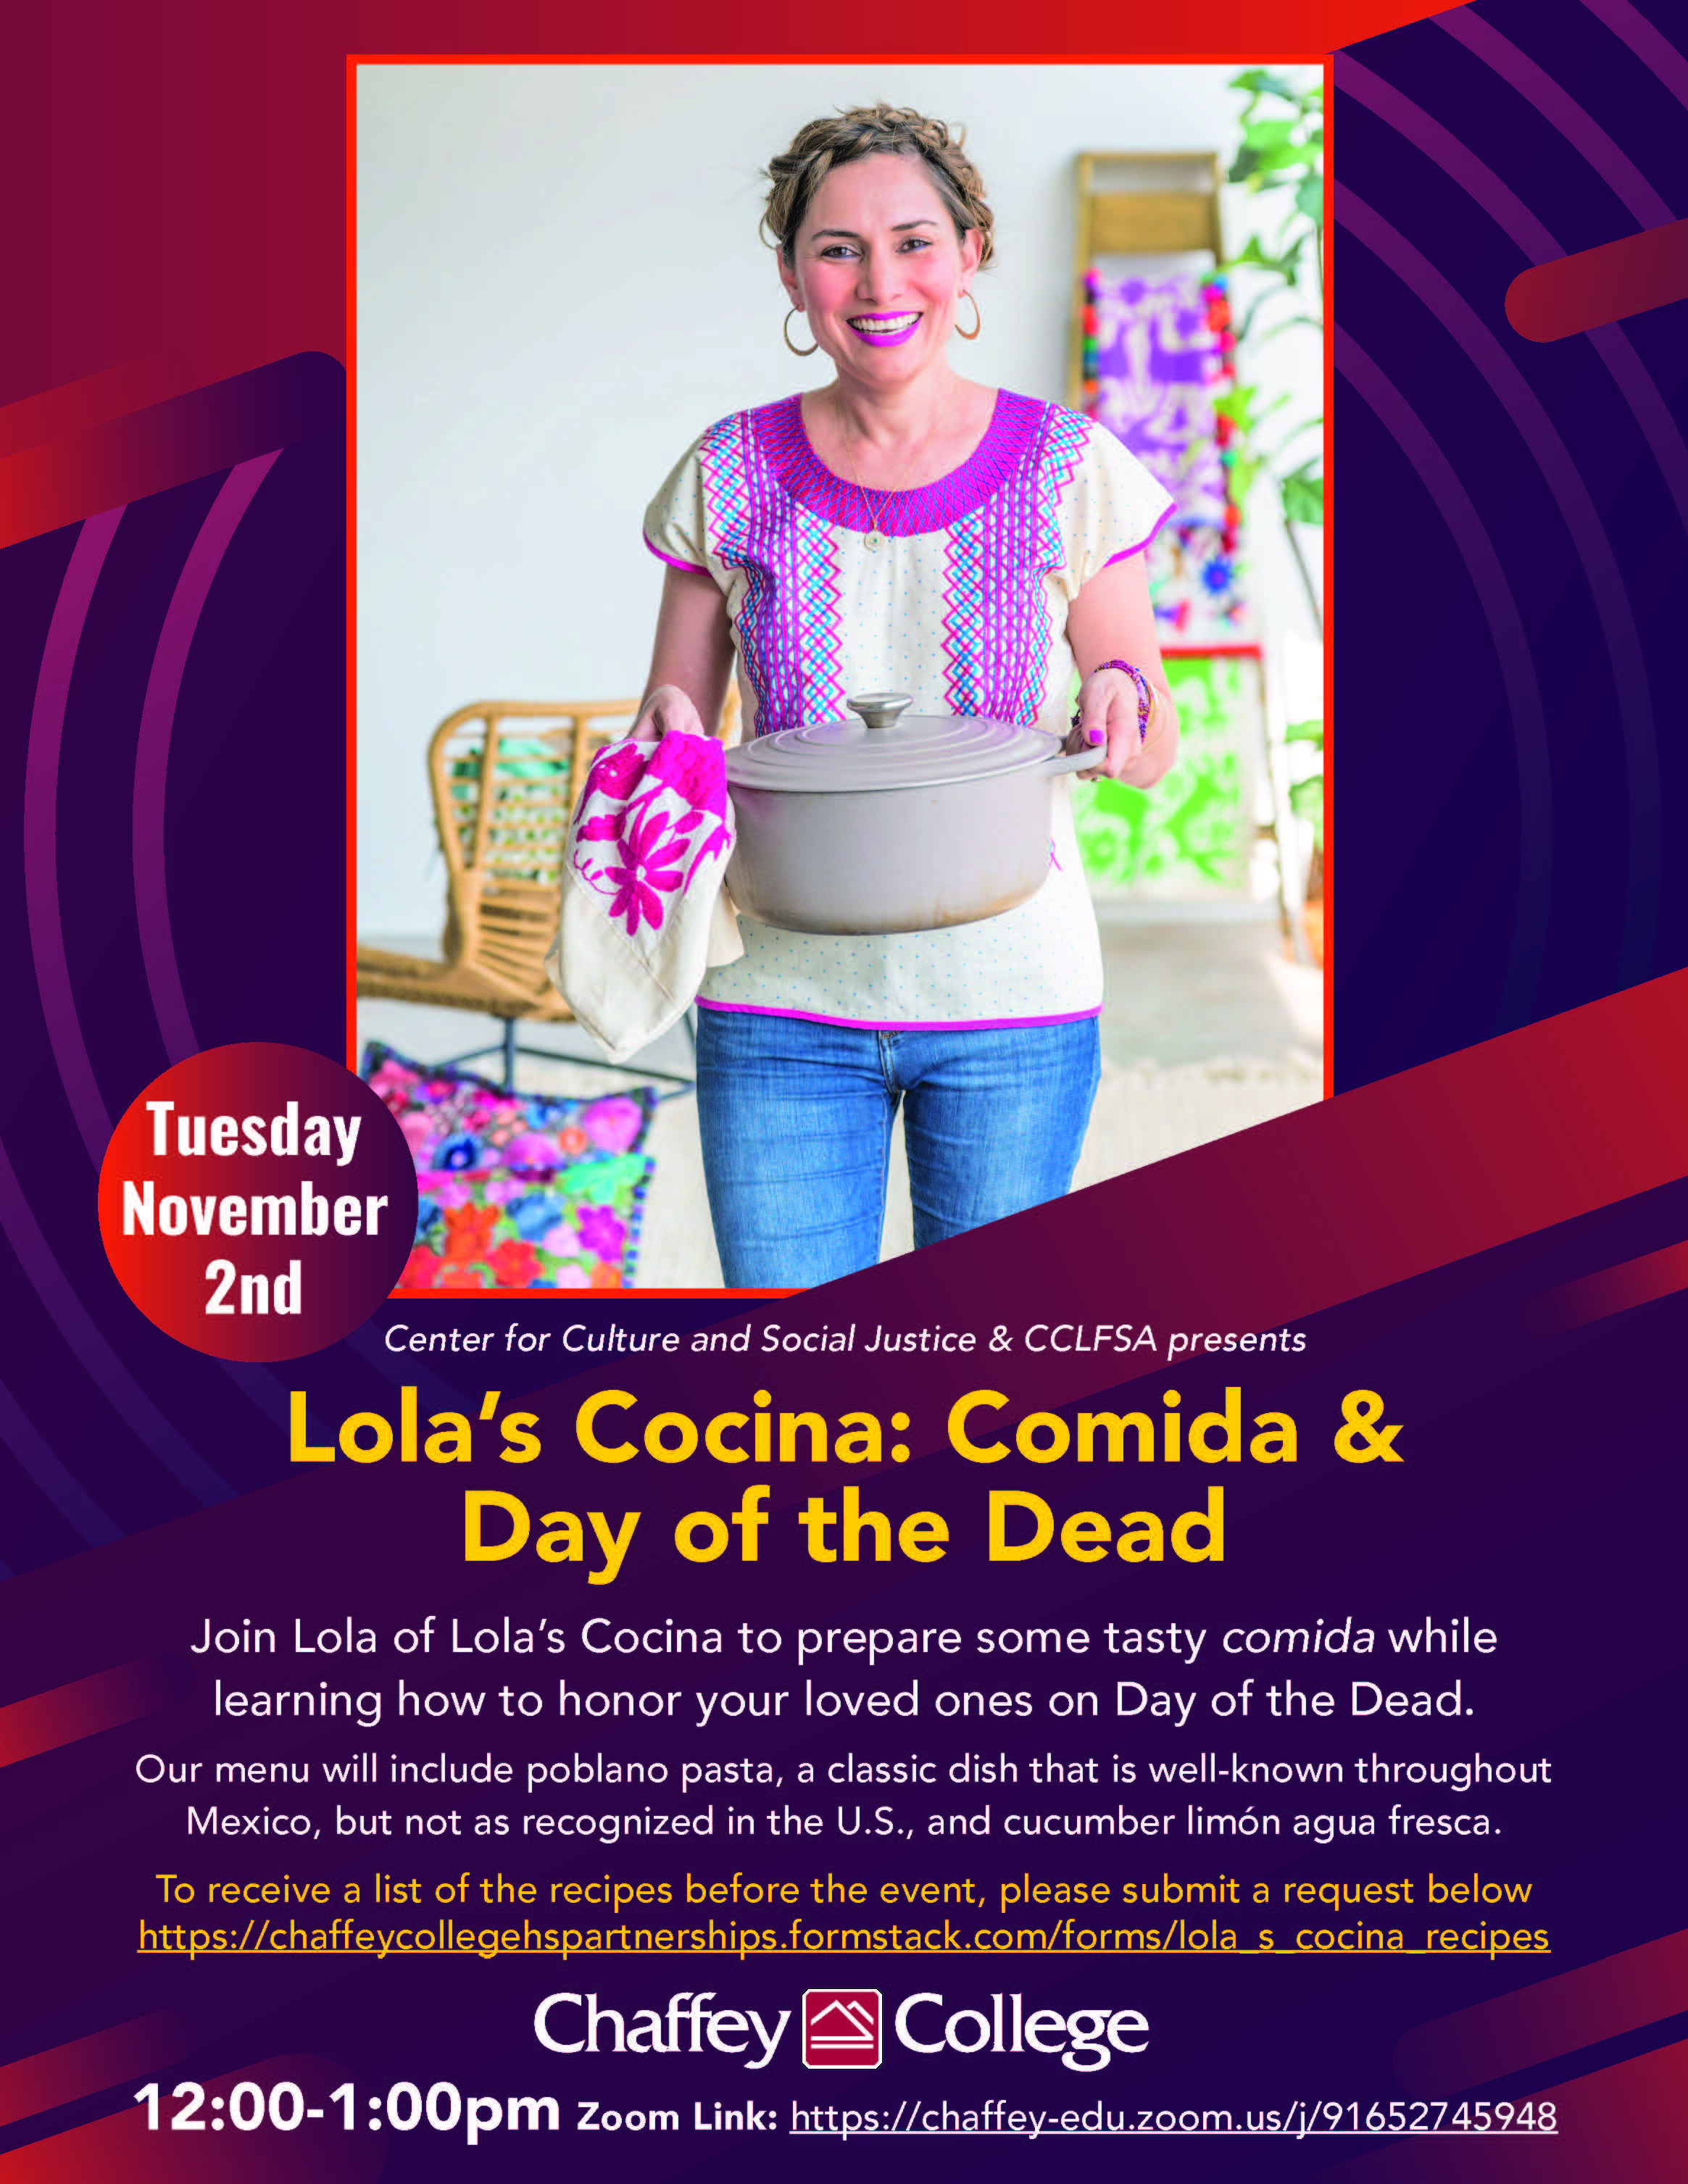 Lola's Cocina: Cooking & Day of the Dead